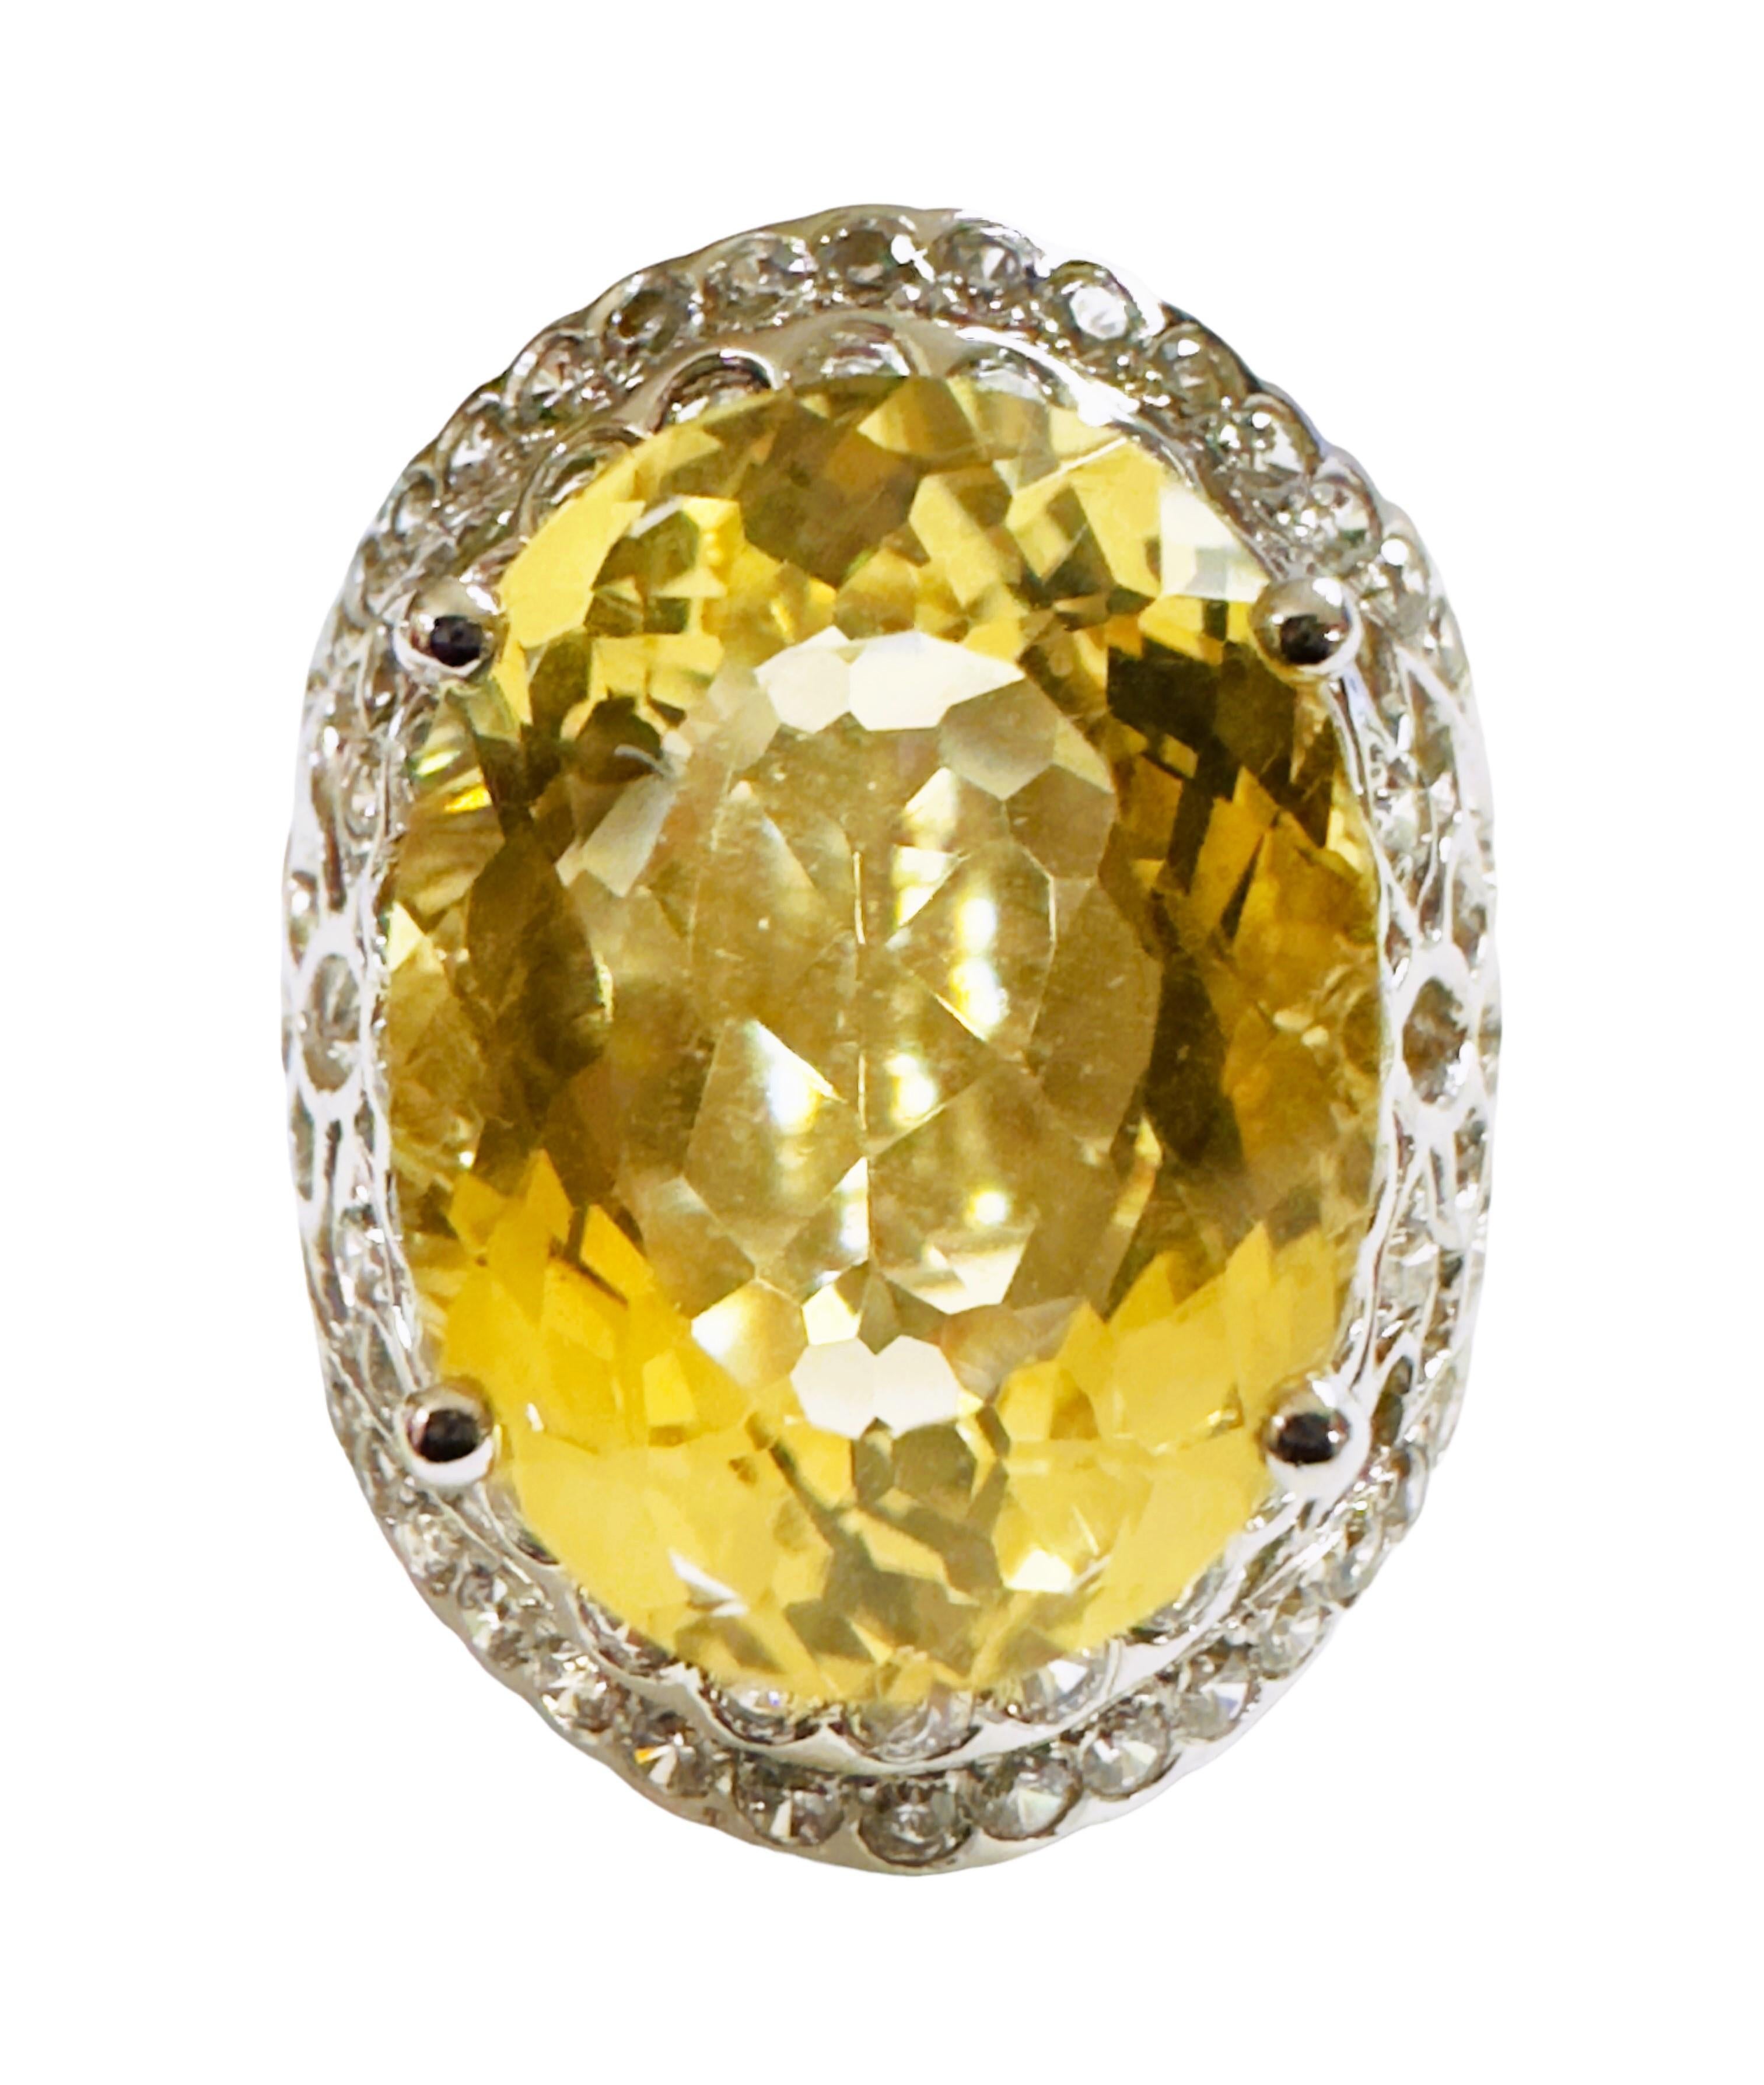 New IF Brazilian 9.30 Ct Yellow Citrine & Sapphire Sterling Ring For Sale 2